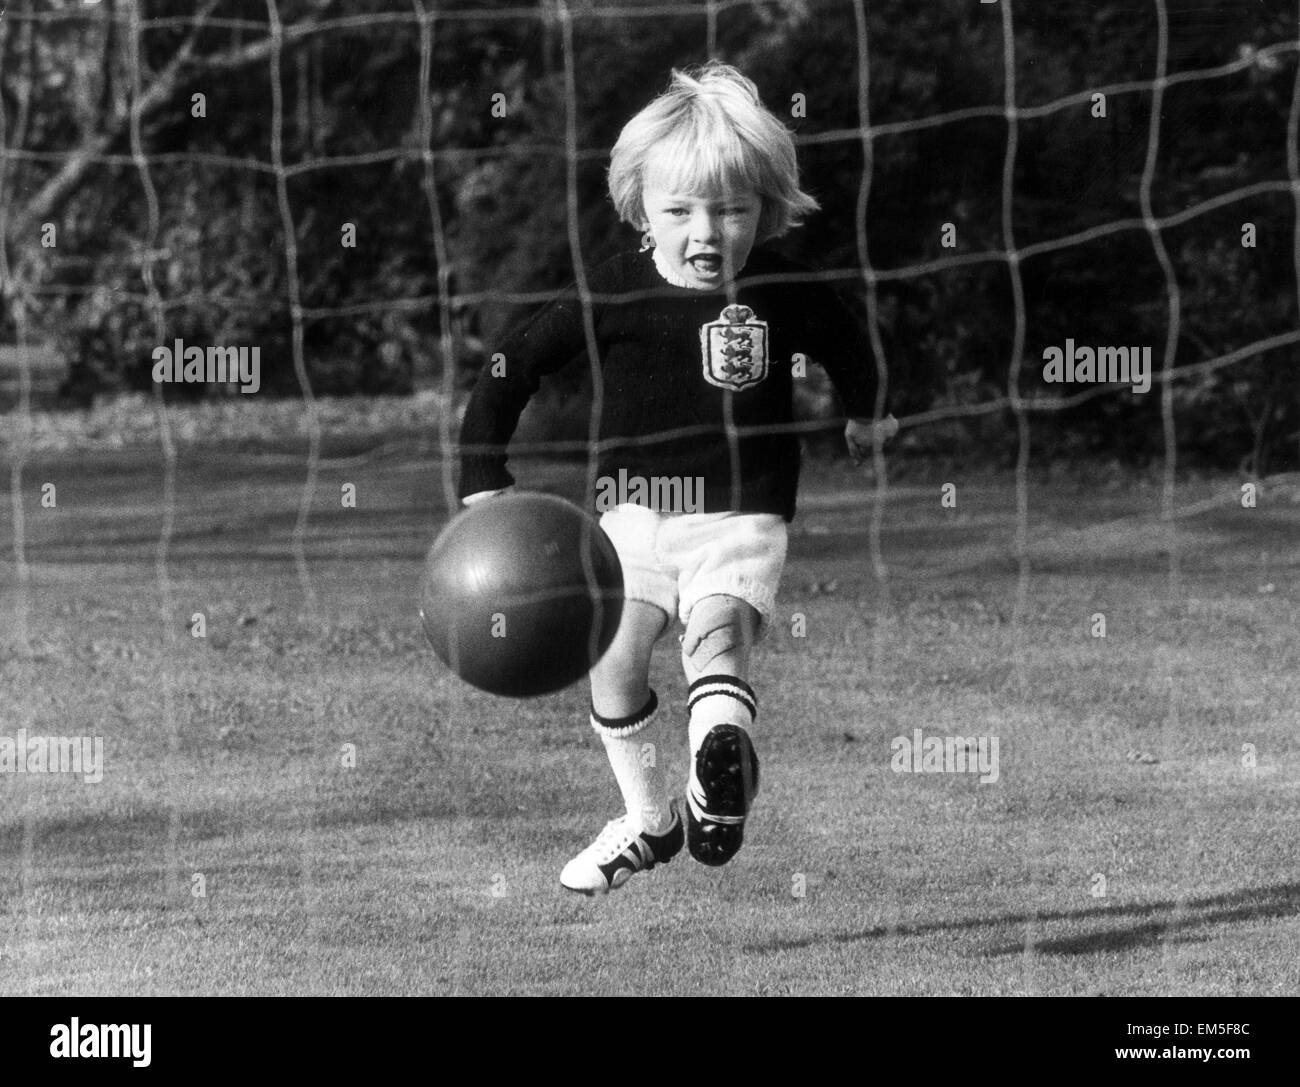 The son of England football international Raich Carter, practicing in the back garden of the family home, wearing an England jersey. 25th October 1972. Stock Photo